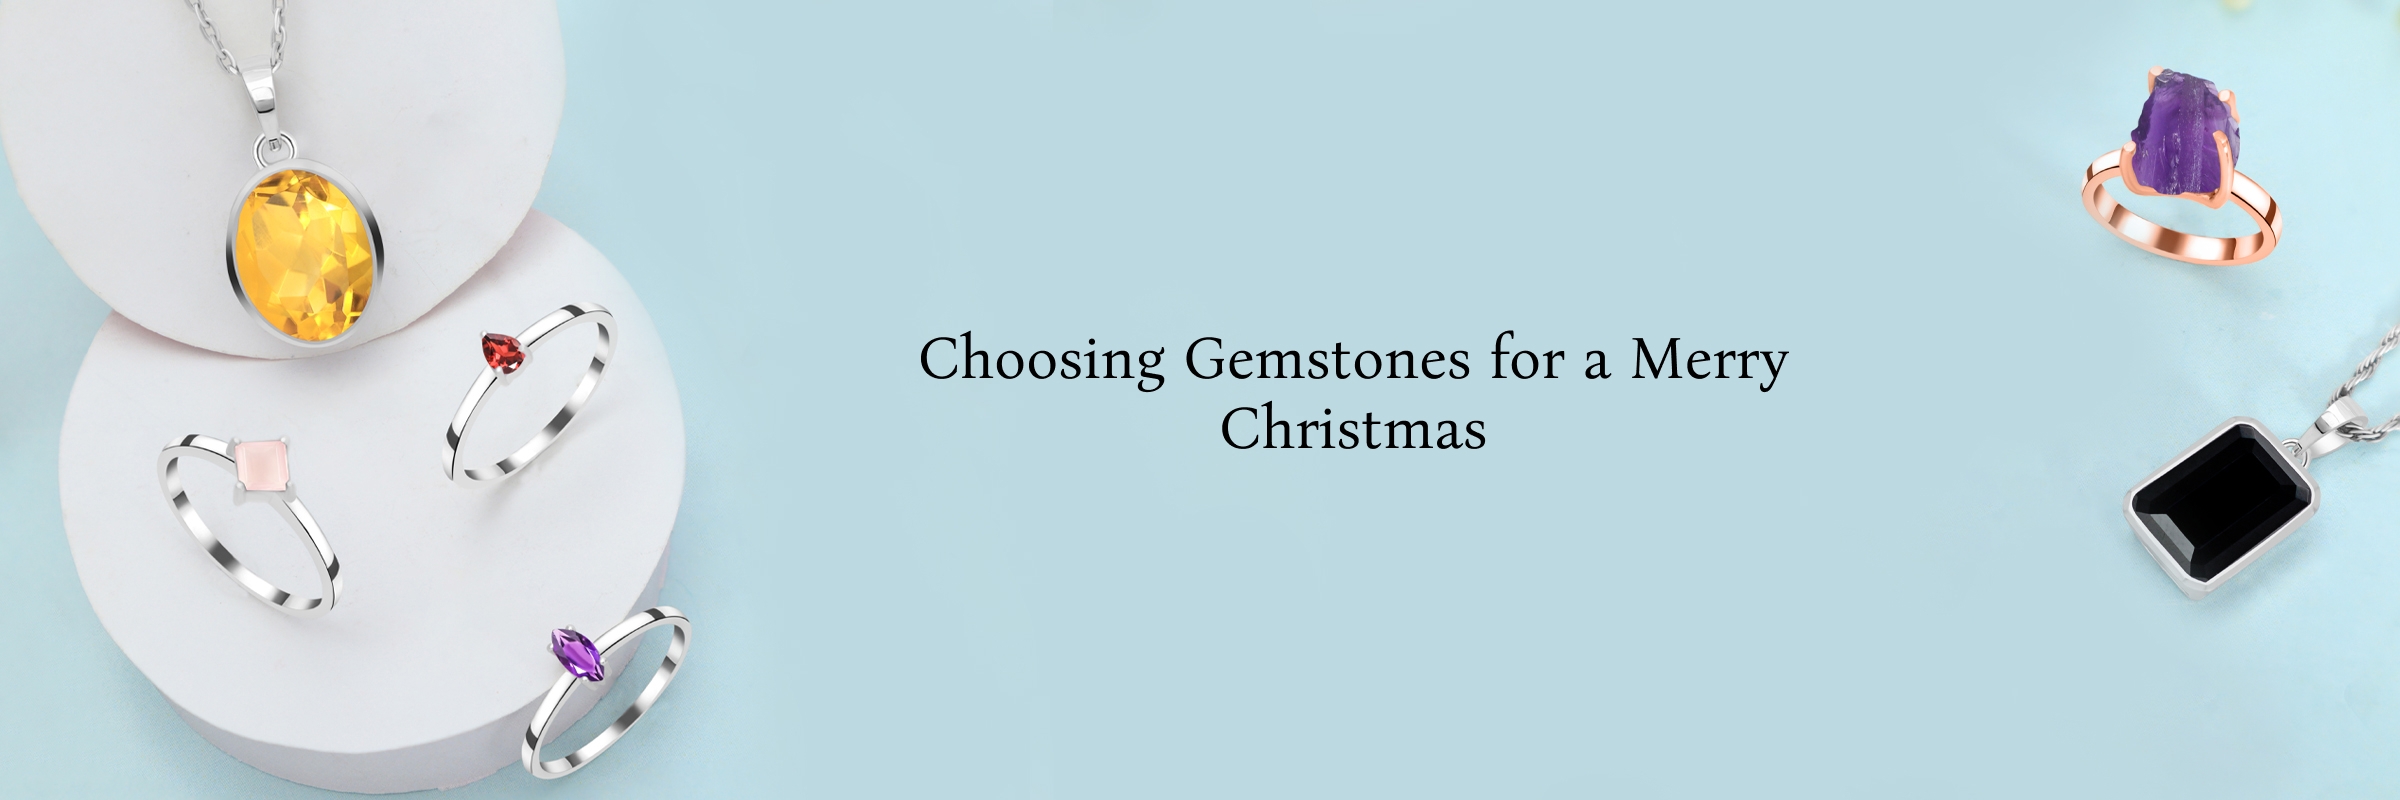 Which Gemstones would be the best for his Christmas